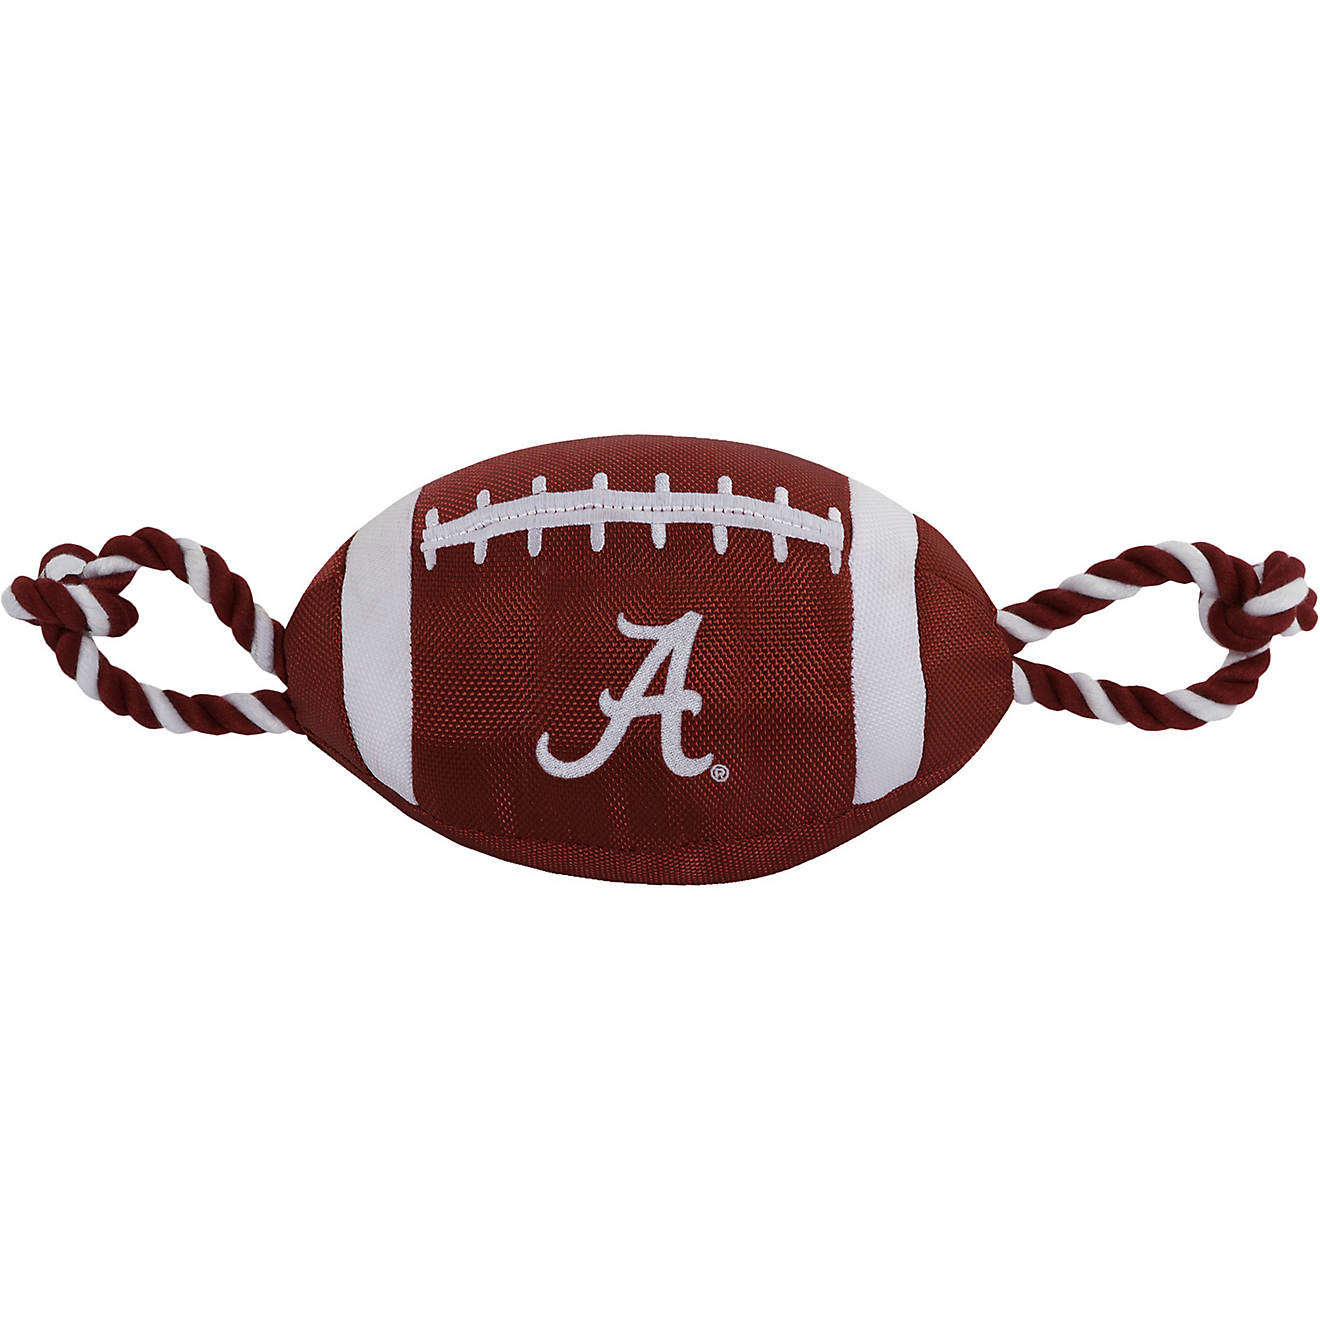 Pets First University of Alabama Nylon Football Rope Toy                                                                         - view number 1